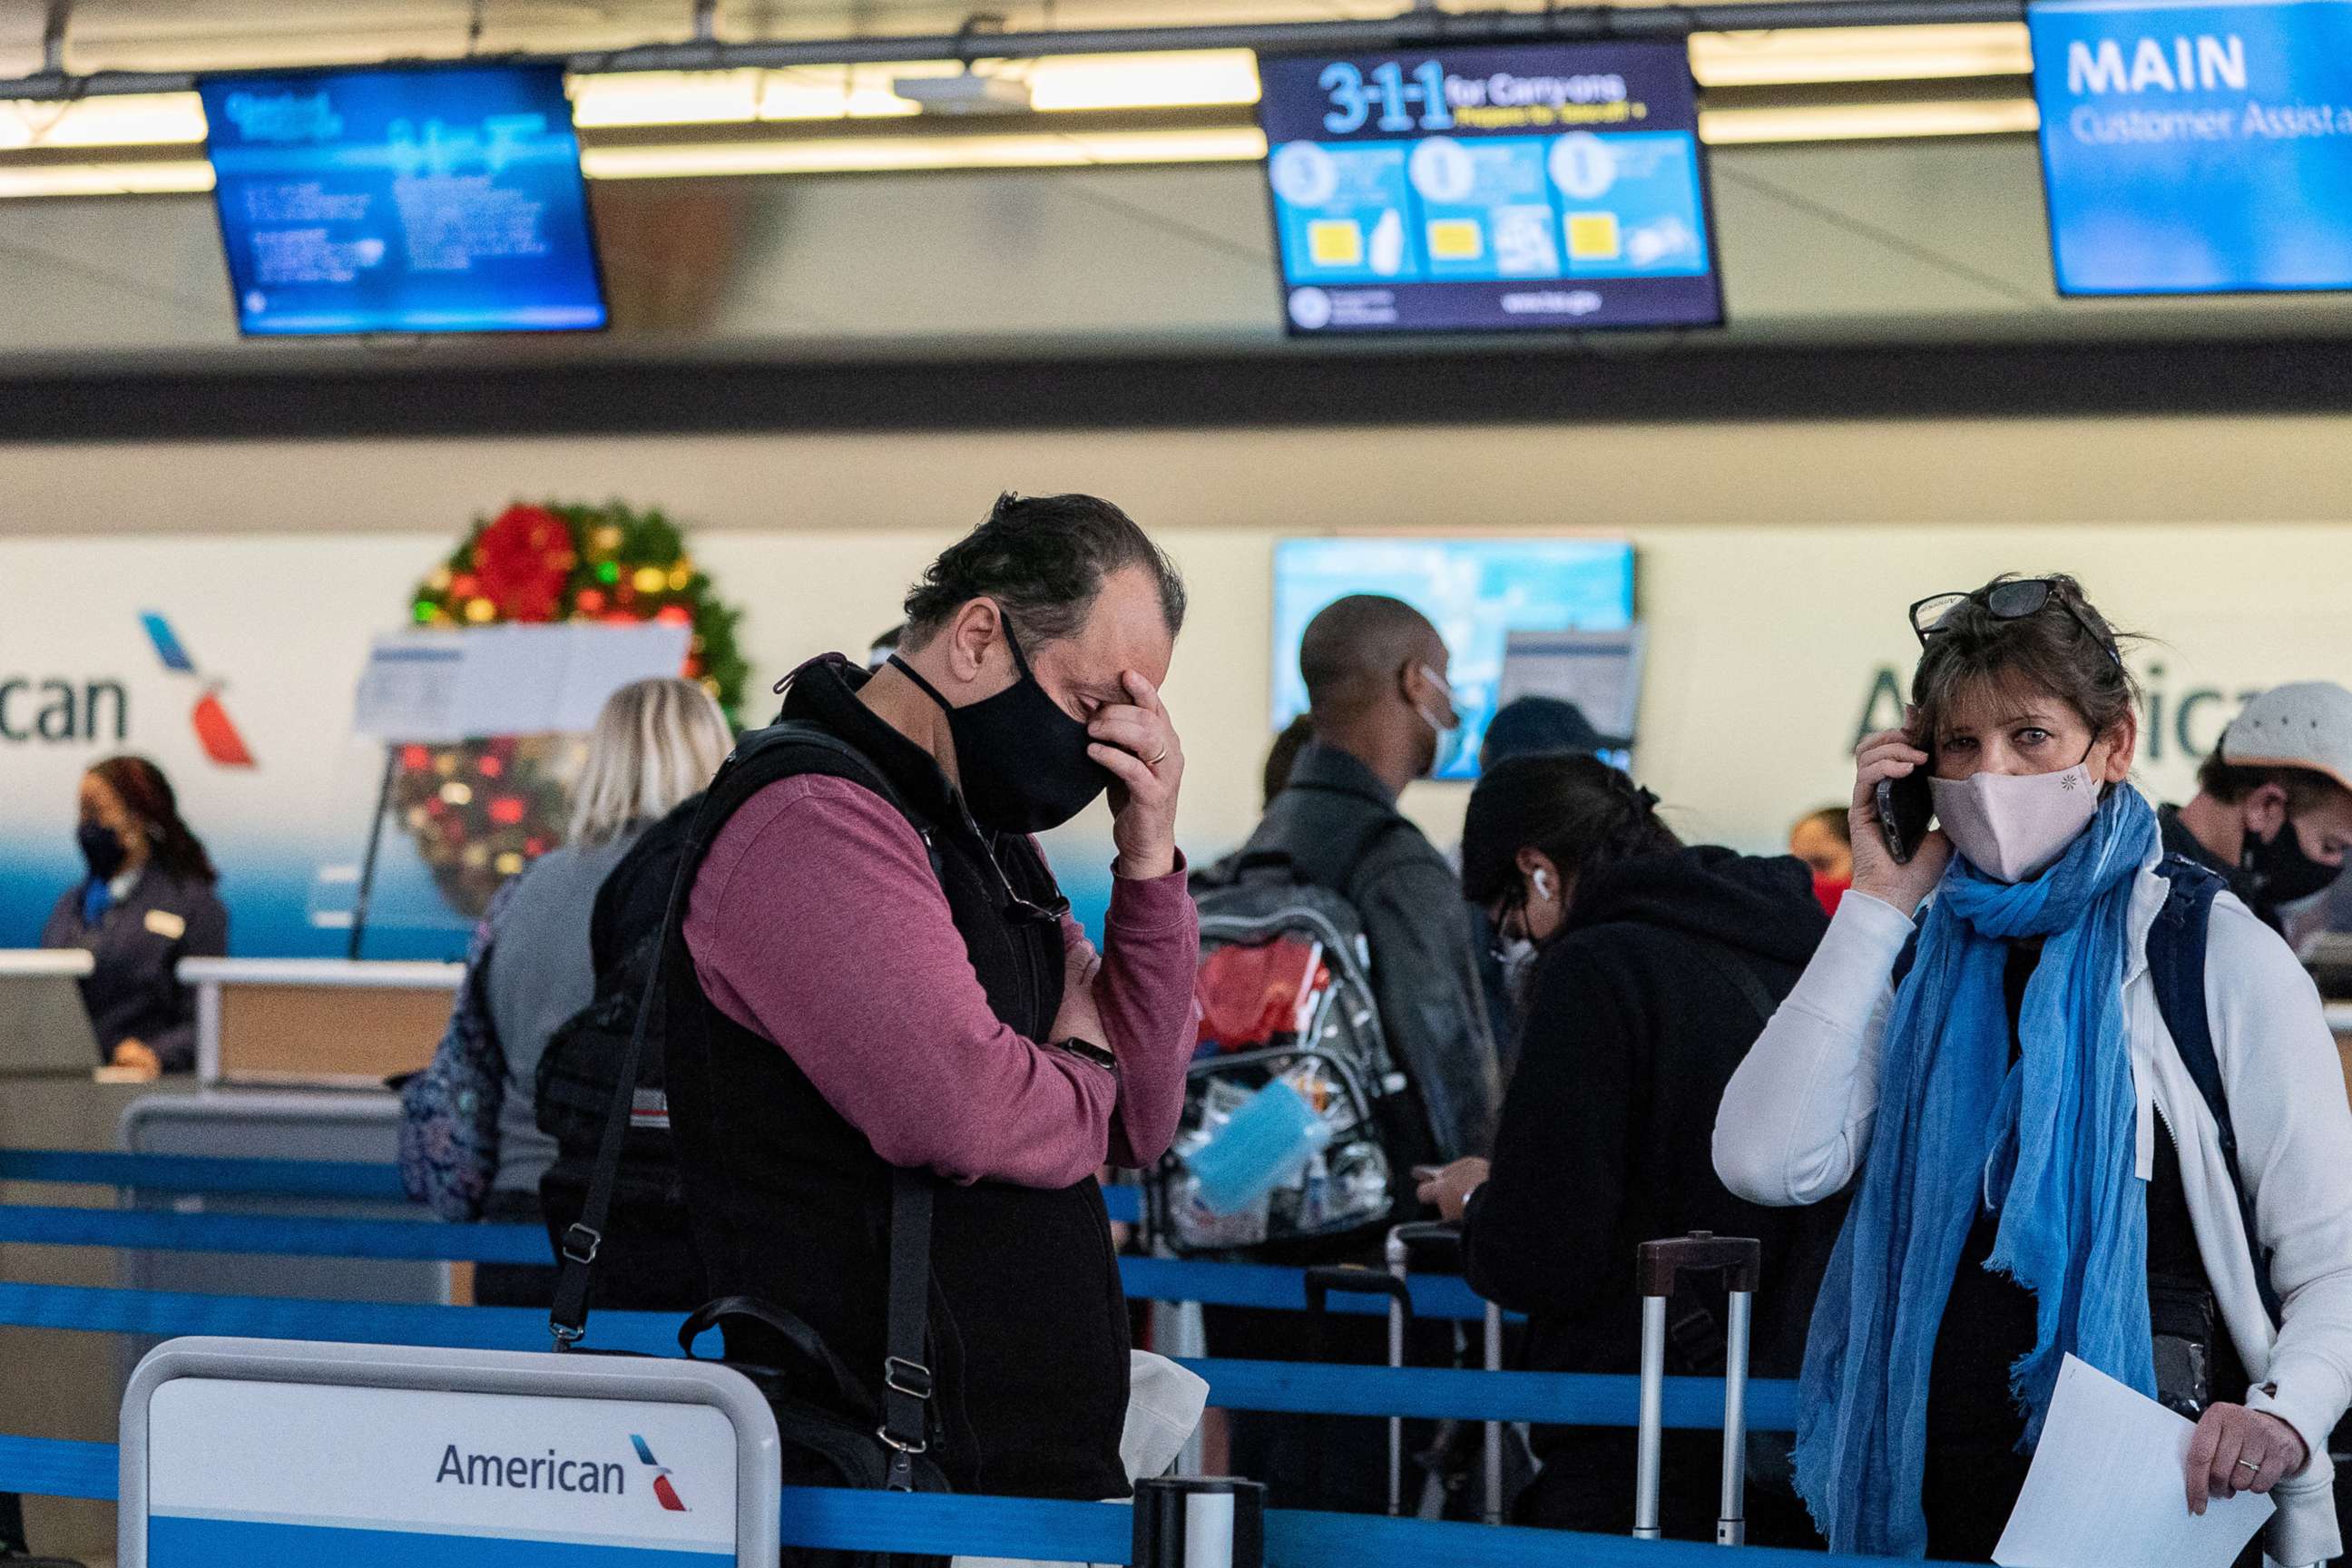 PHOTO: Passengers line up at John F. Kennedy International Airport during the spread of the Omicron coronavirus variant in New York, Dec. 26, 2021. 